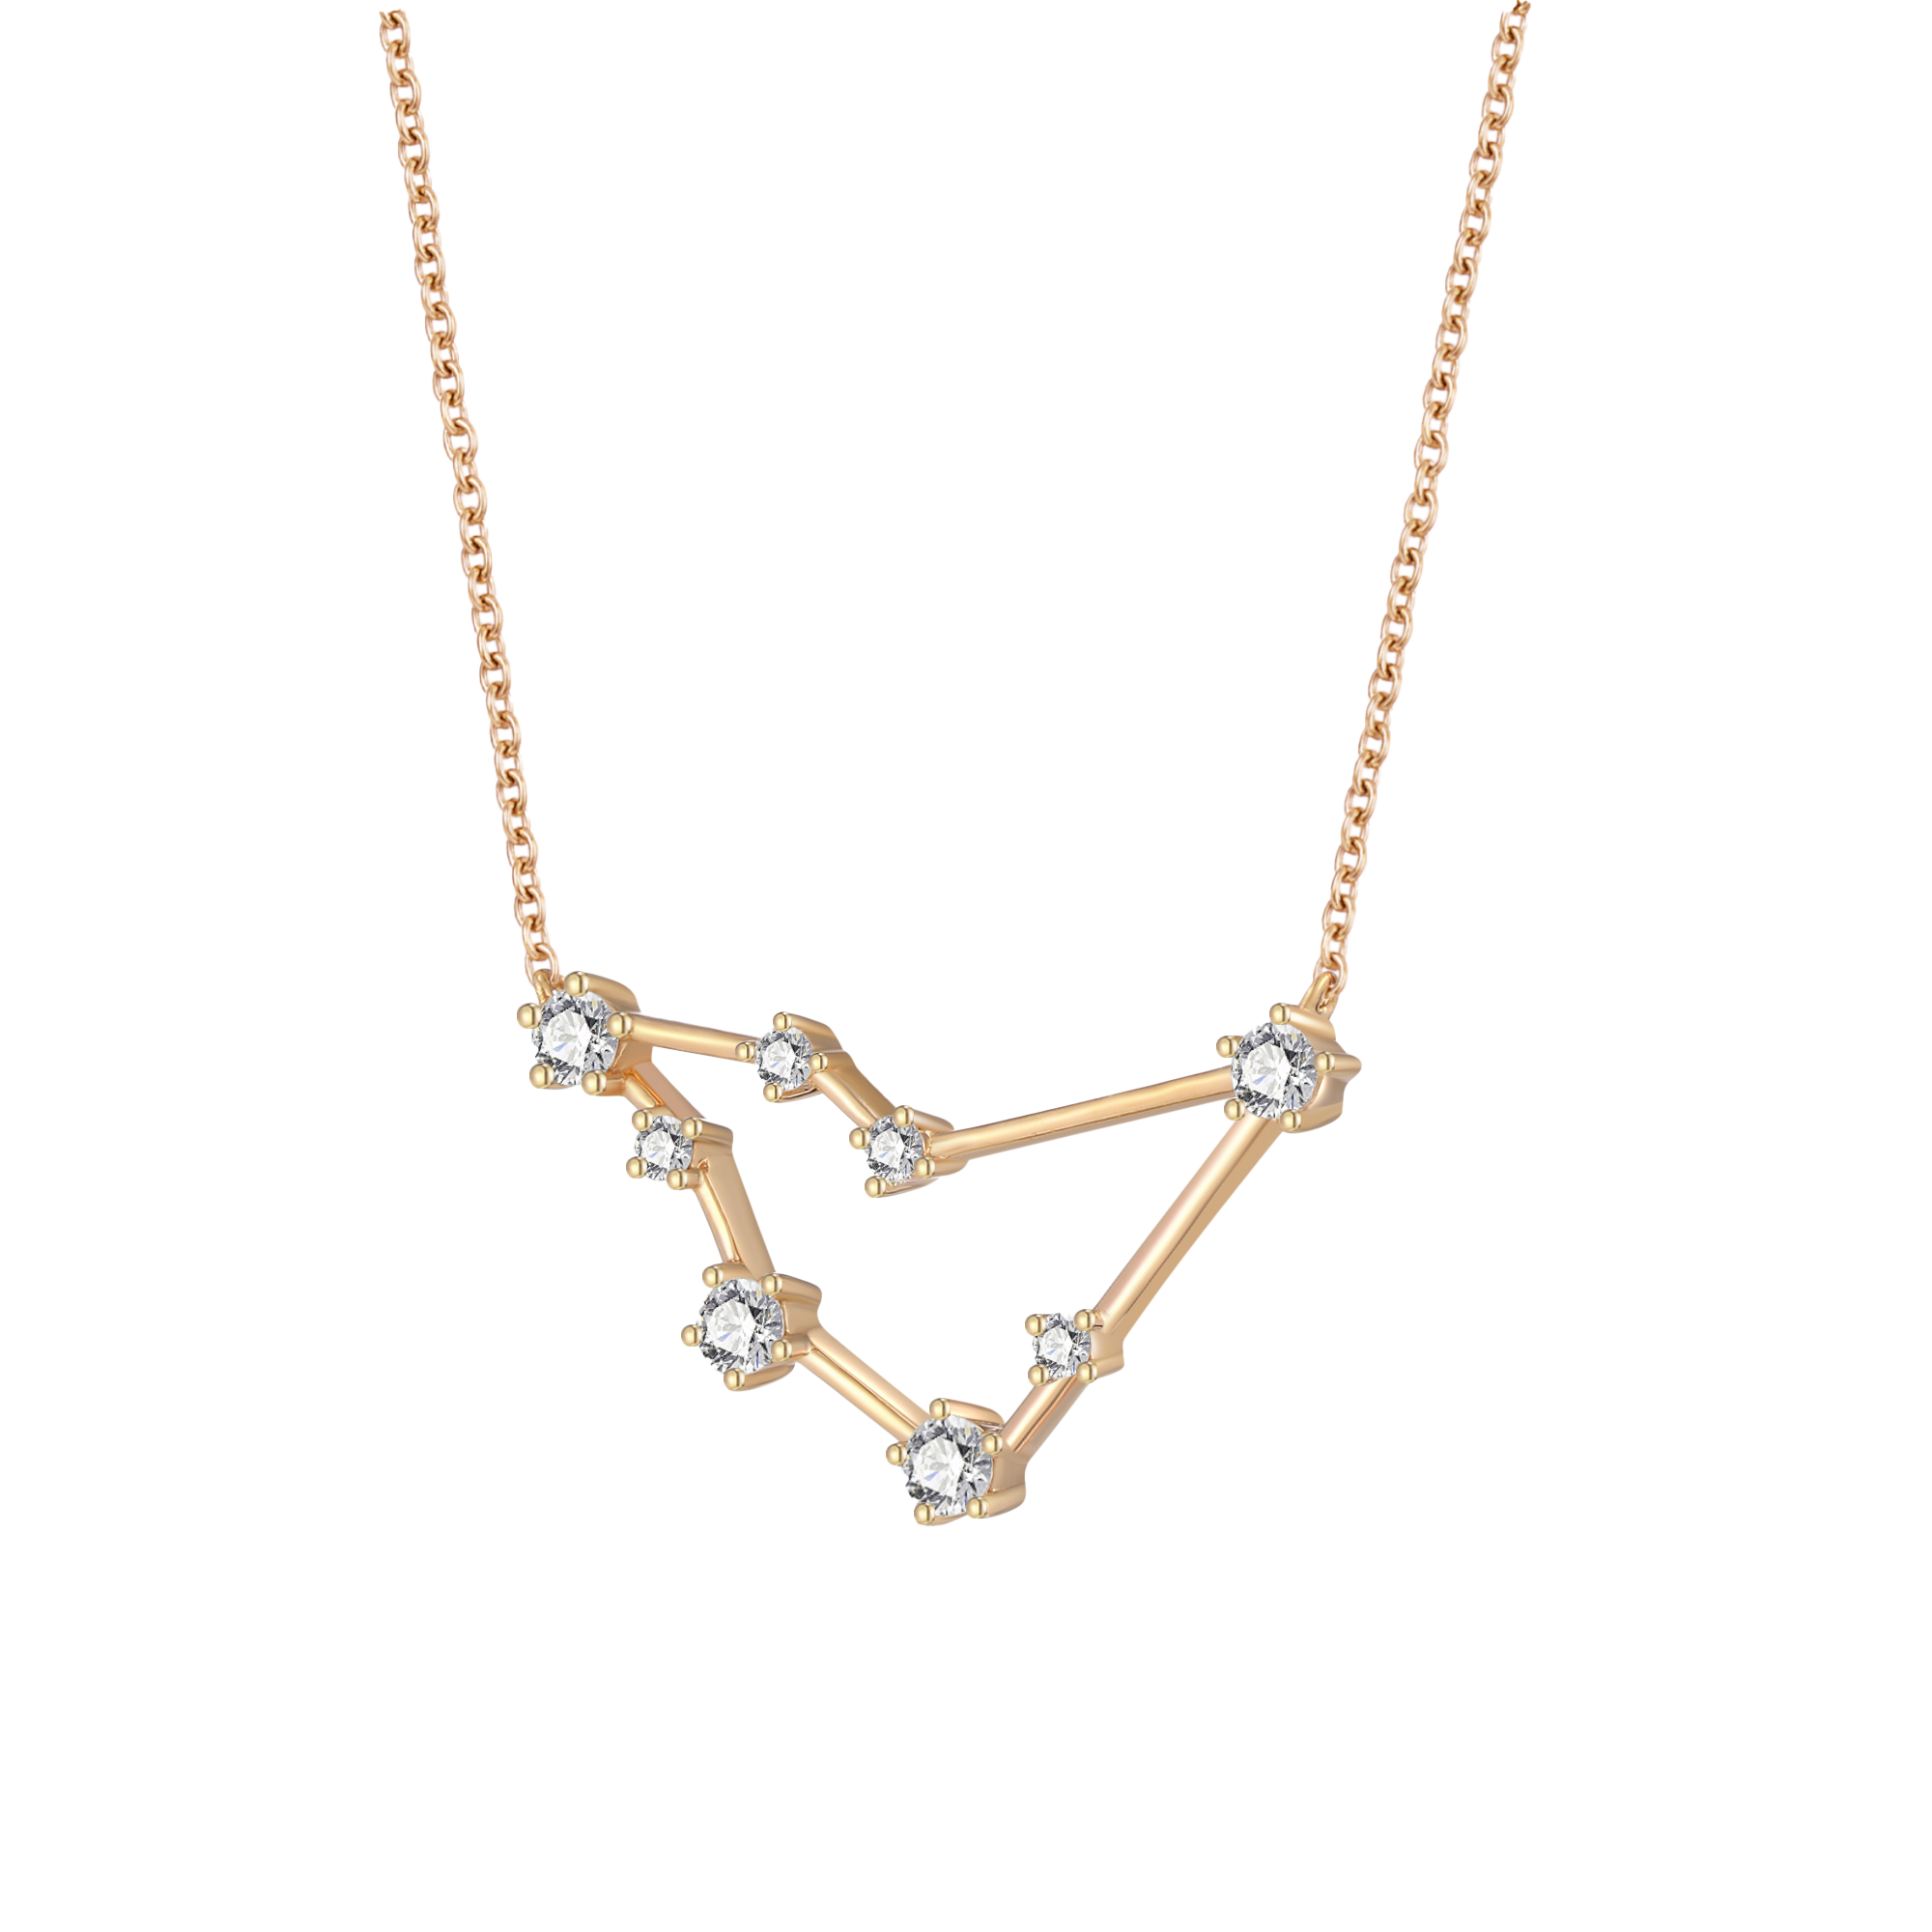 Capricorn Constellation Necklace- 14kt Rose Gold Fill | LUCIUS Jewelry